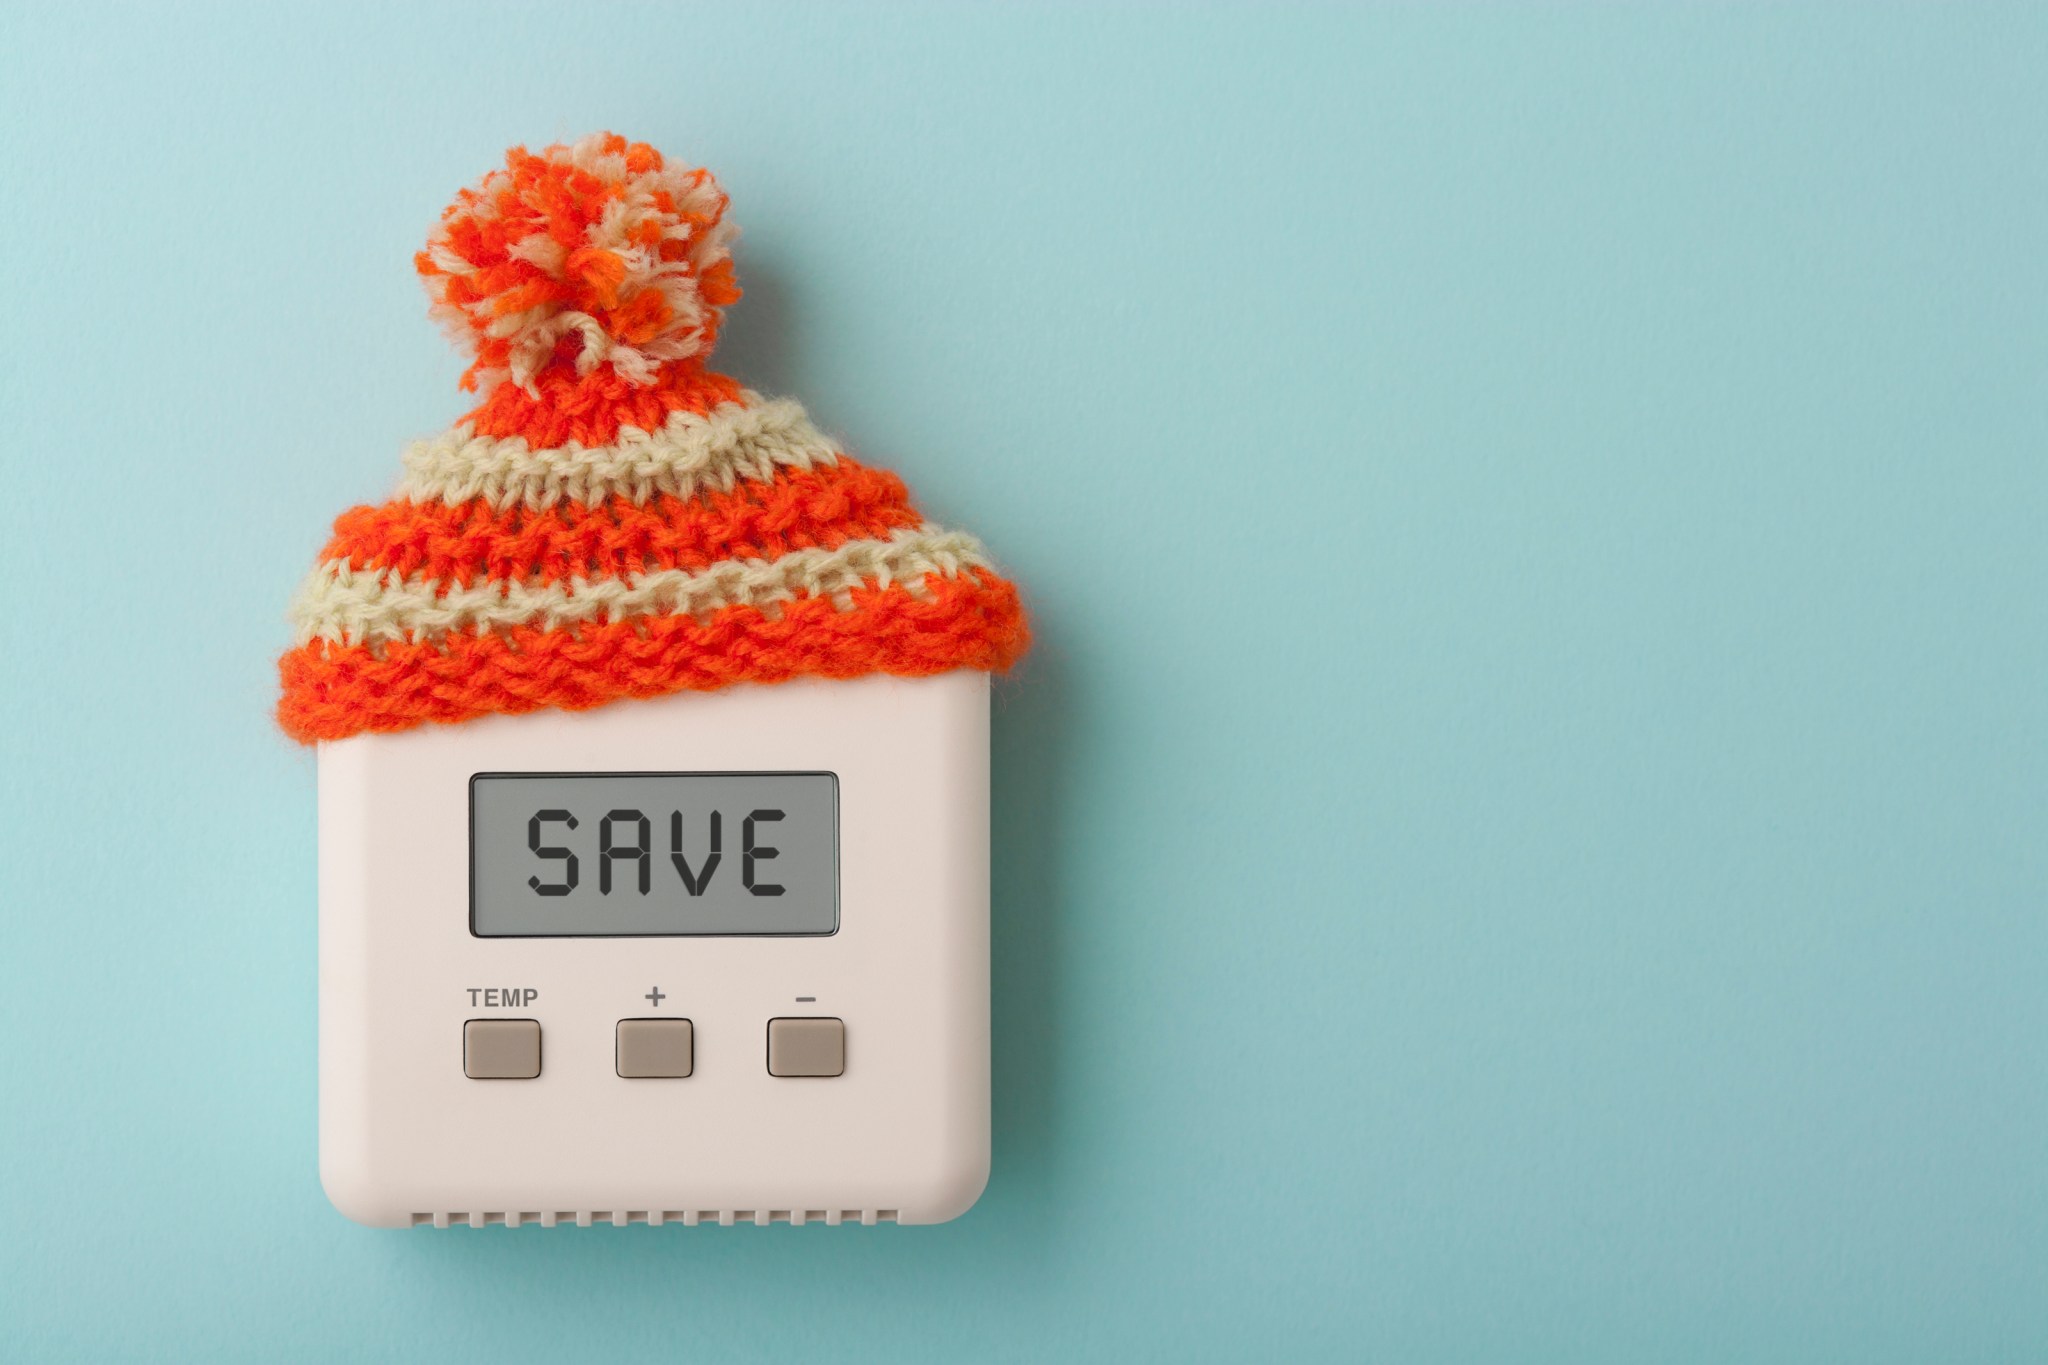 the word SAVE on a digital thermostat wearing wooly knit hat on a light blue wall for heating cooling